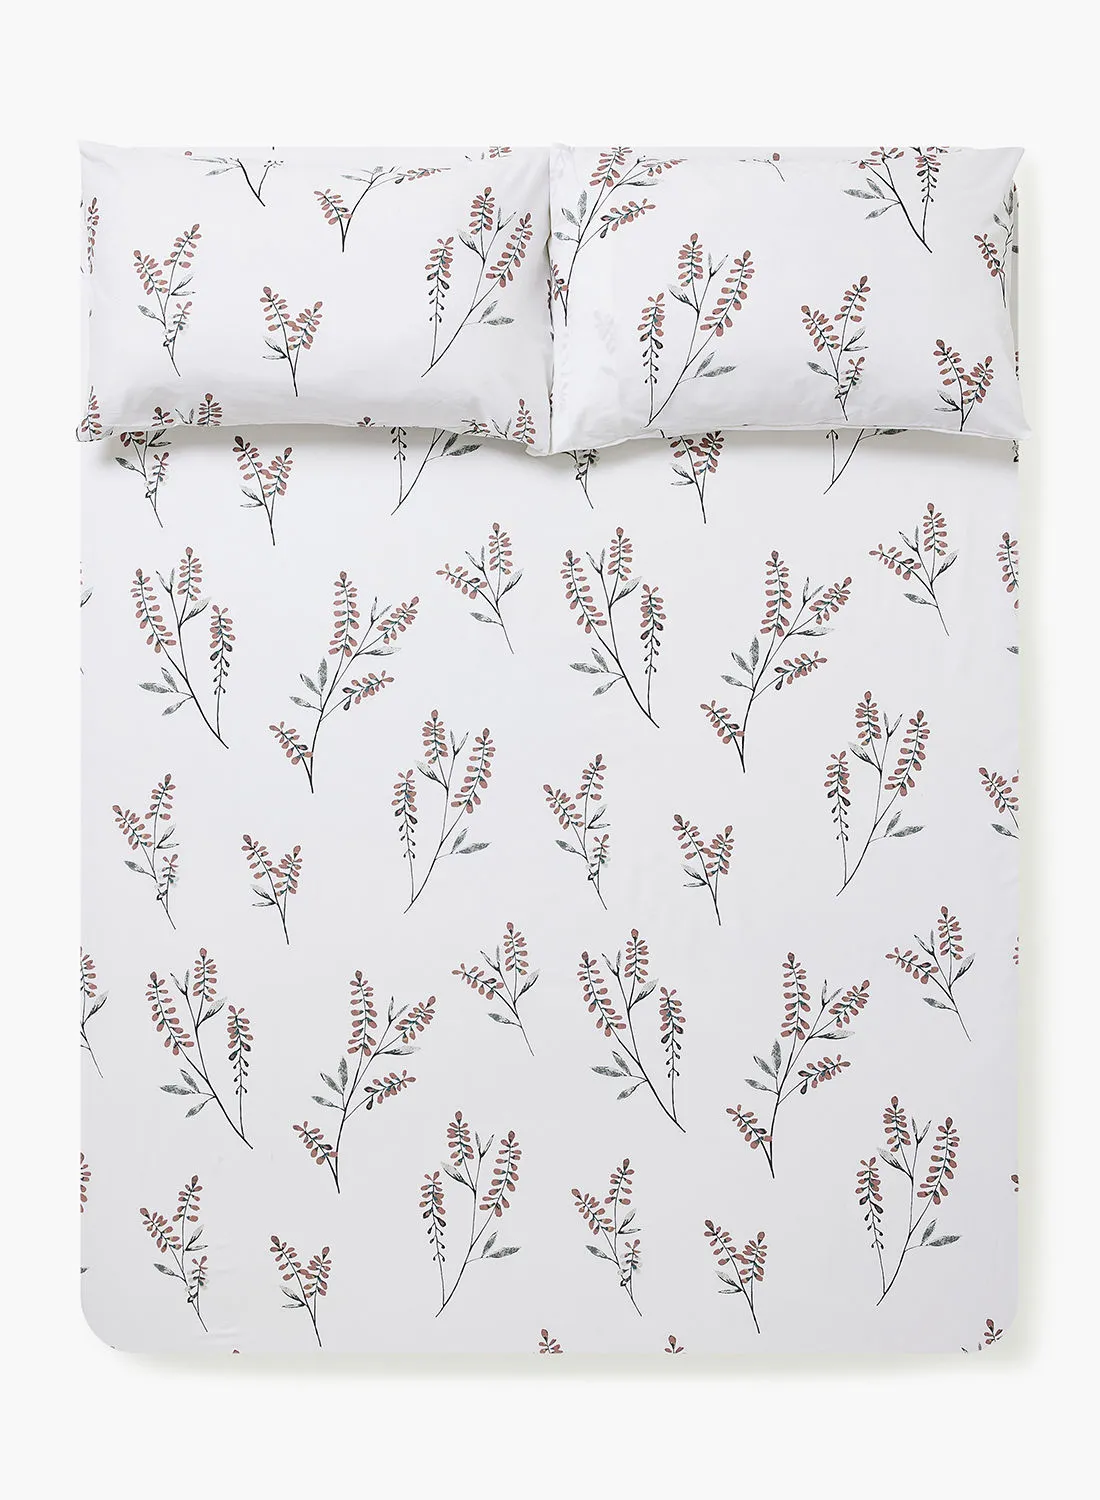 Amal Fitted Bedsheet Set Twin Size High Quality 100% Cotton Percale 144 TC Light Weight Everyday Use 1 Bed Sheet And 2 Pillow Cases Printed White/Leaves